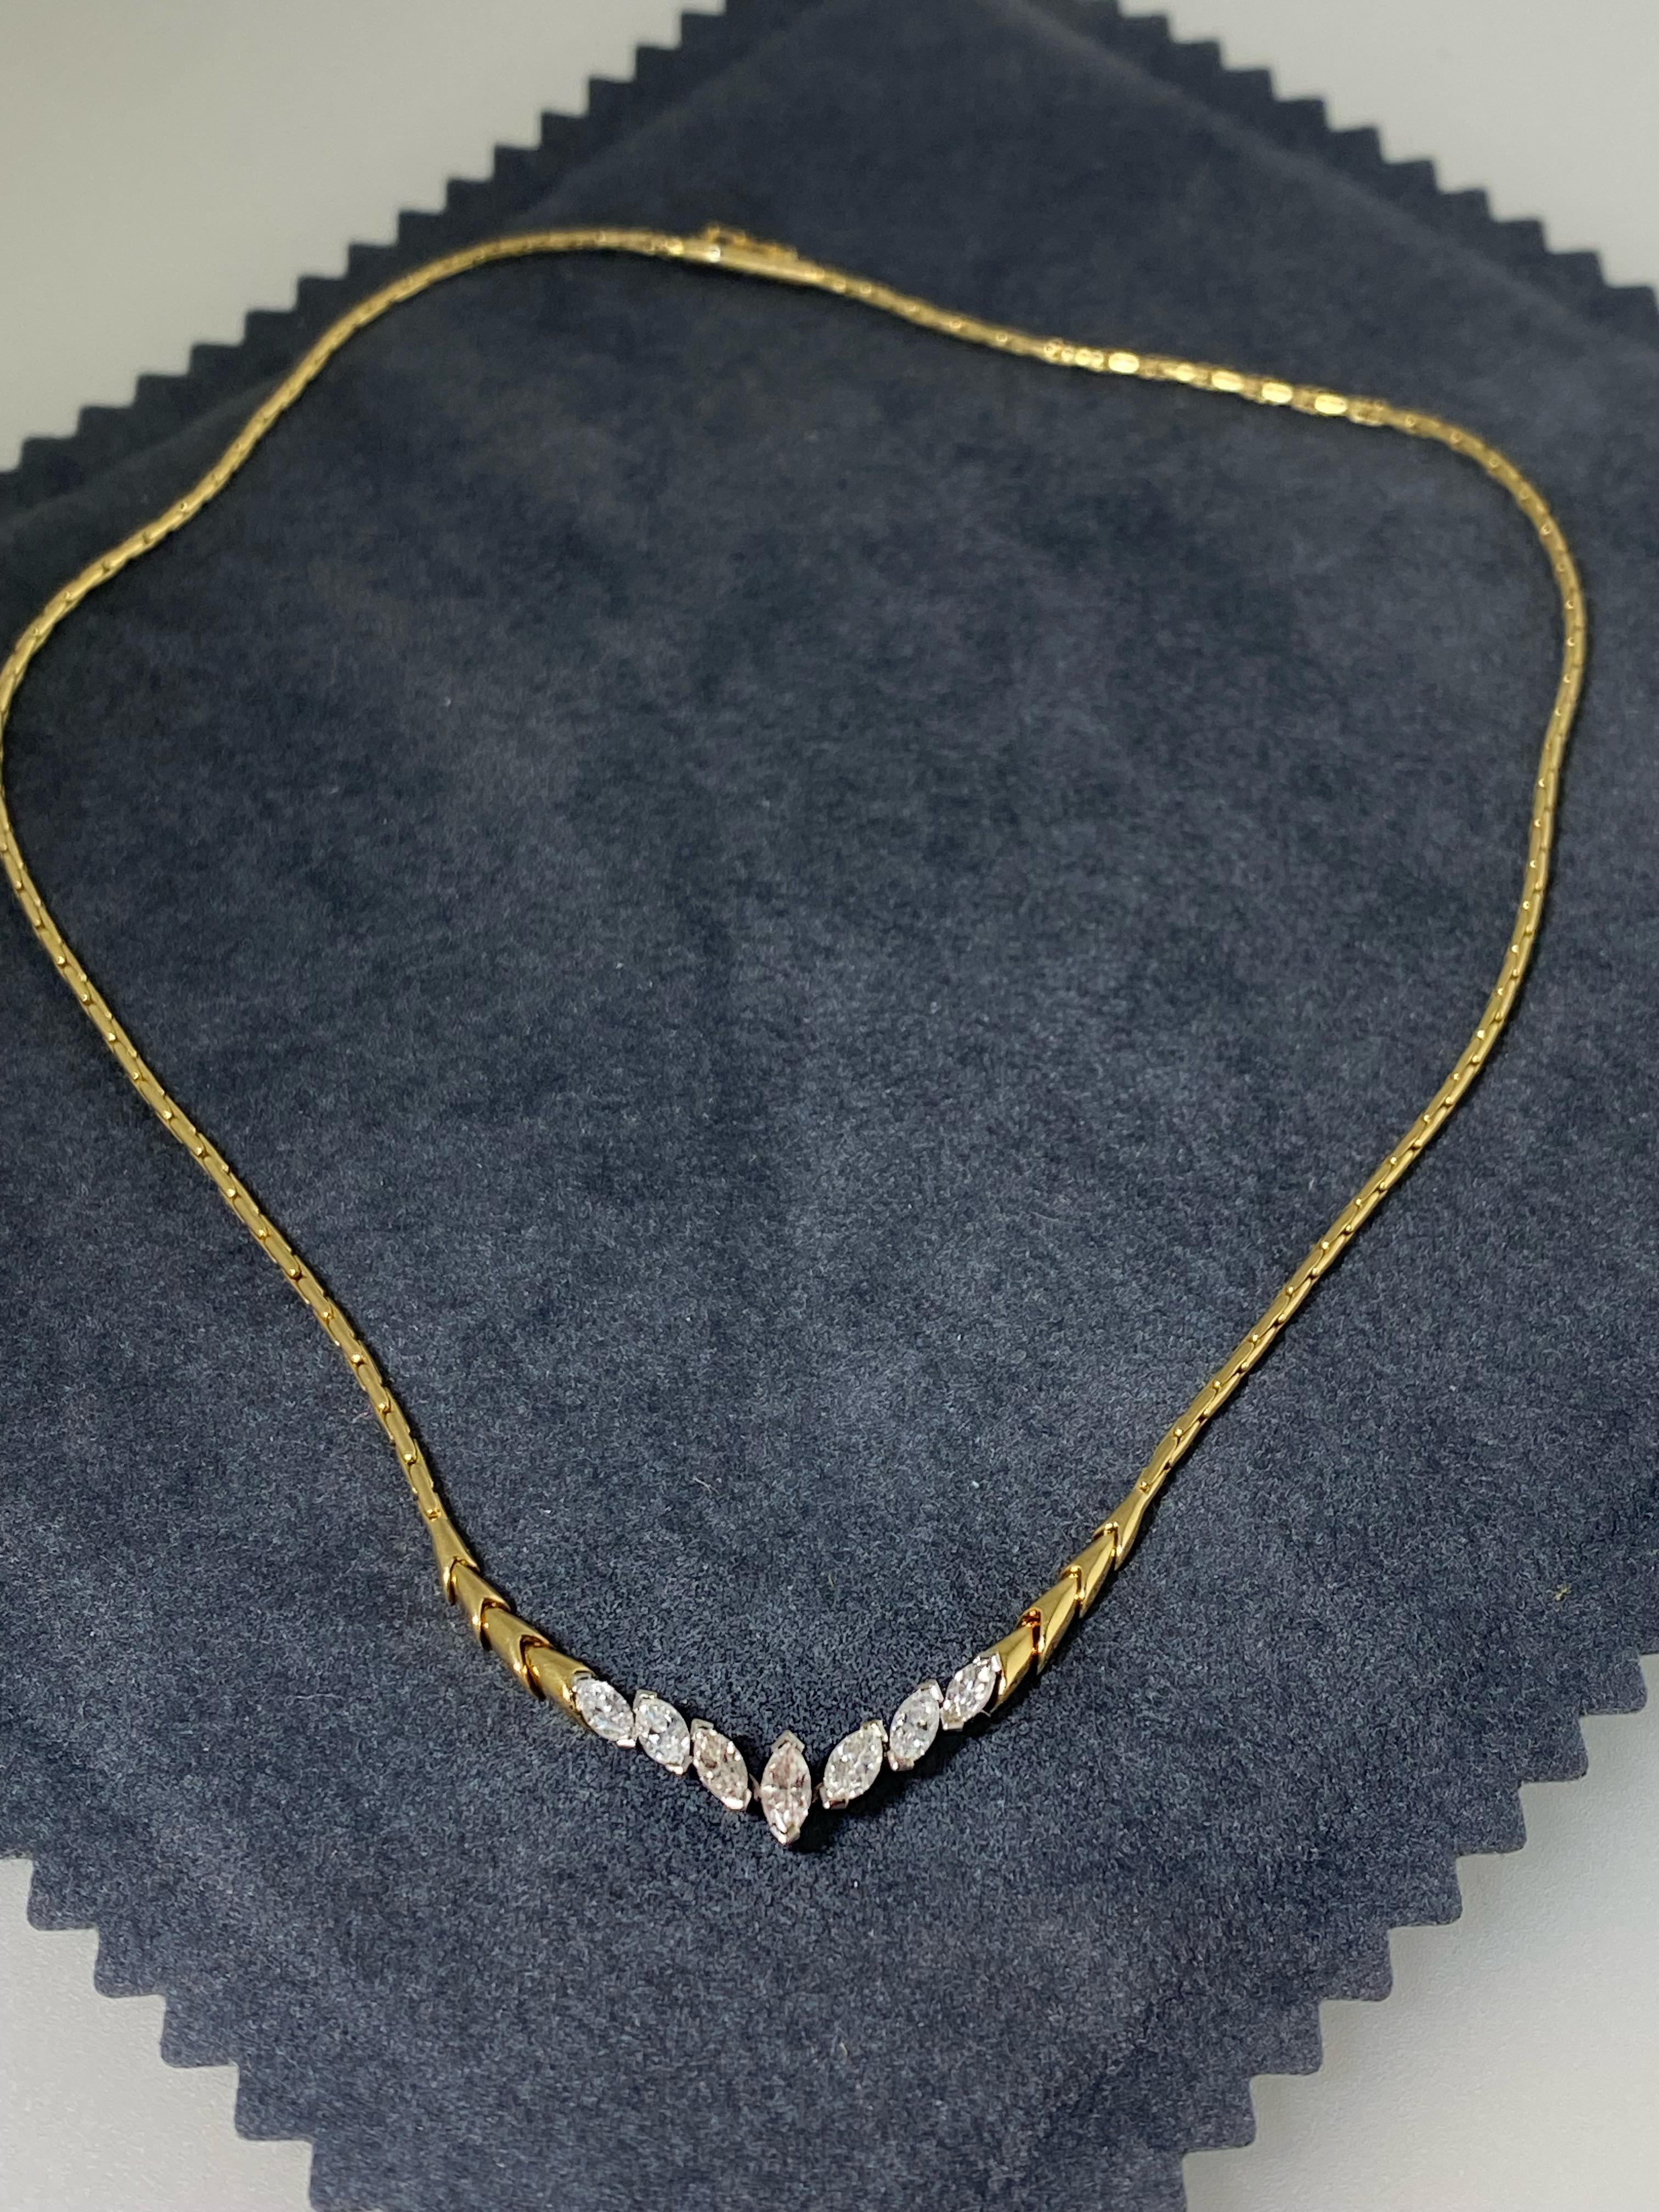 1.00ct Marquise Diamond (x 7) Necklace in 18K Yellow Gold, valued at $5900. 2